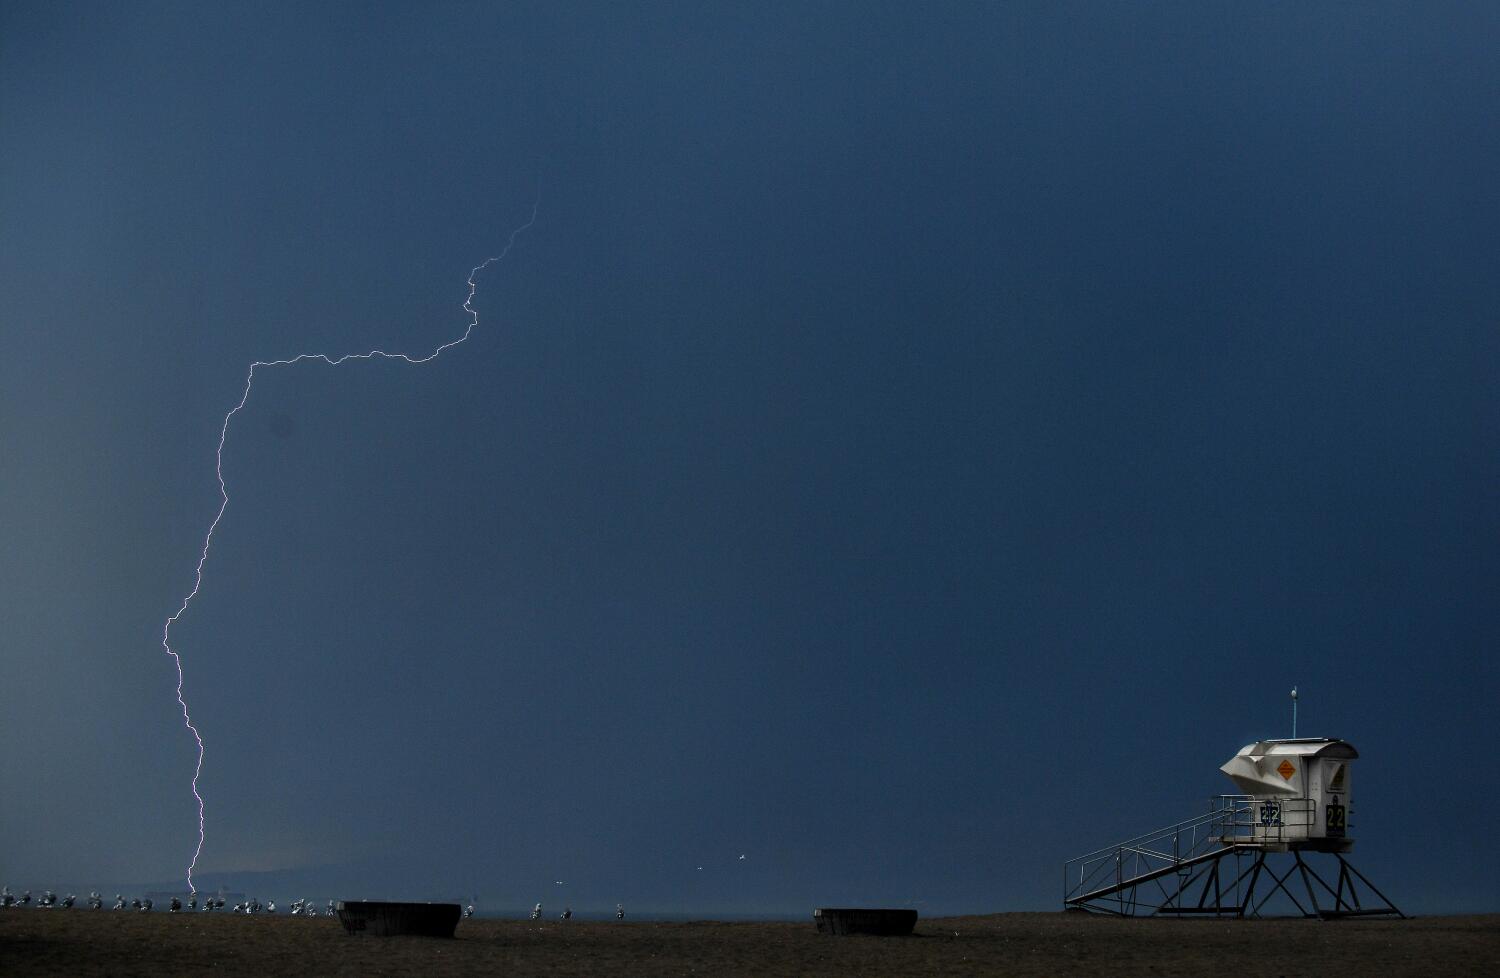 Lightning bolts by the hundreds, 'constant' thunder: Rare thunderstorms hit SoCal Monday